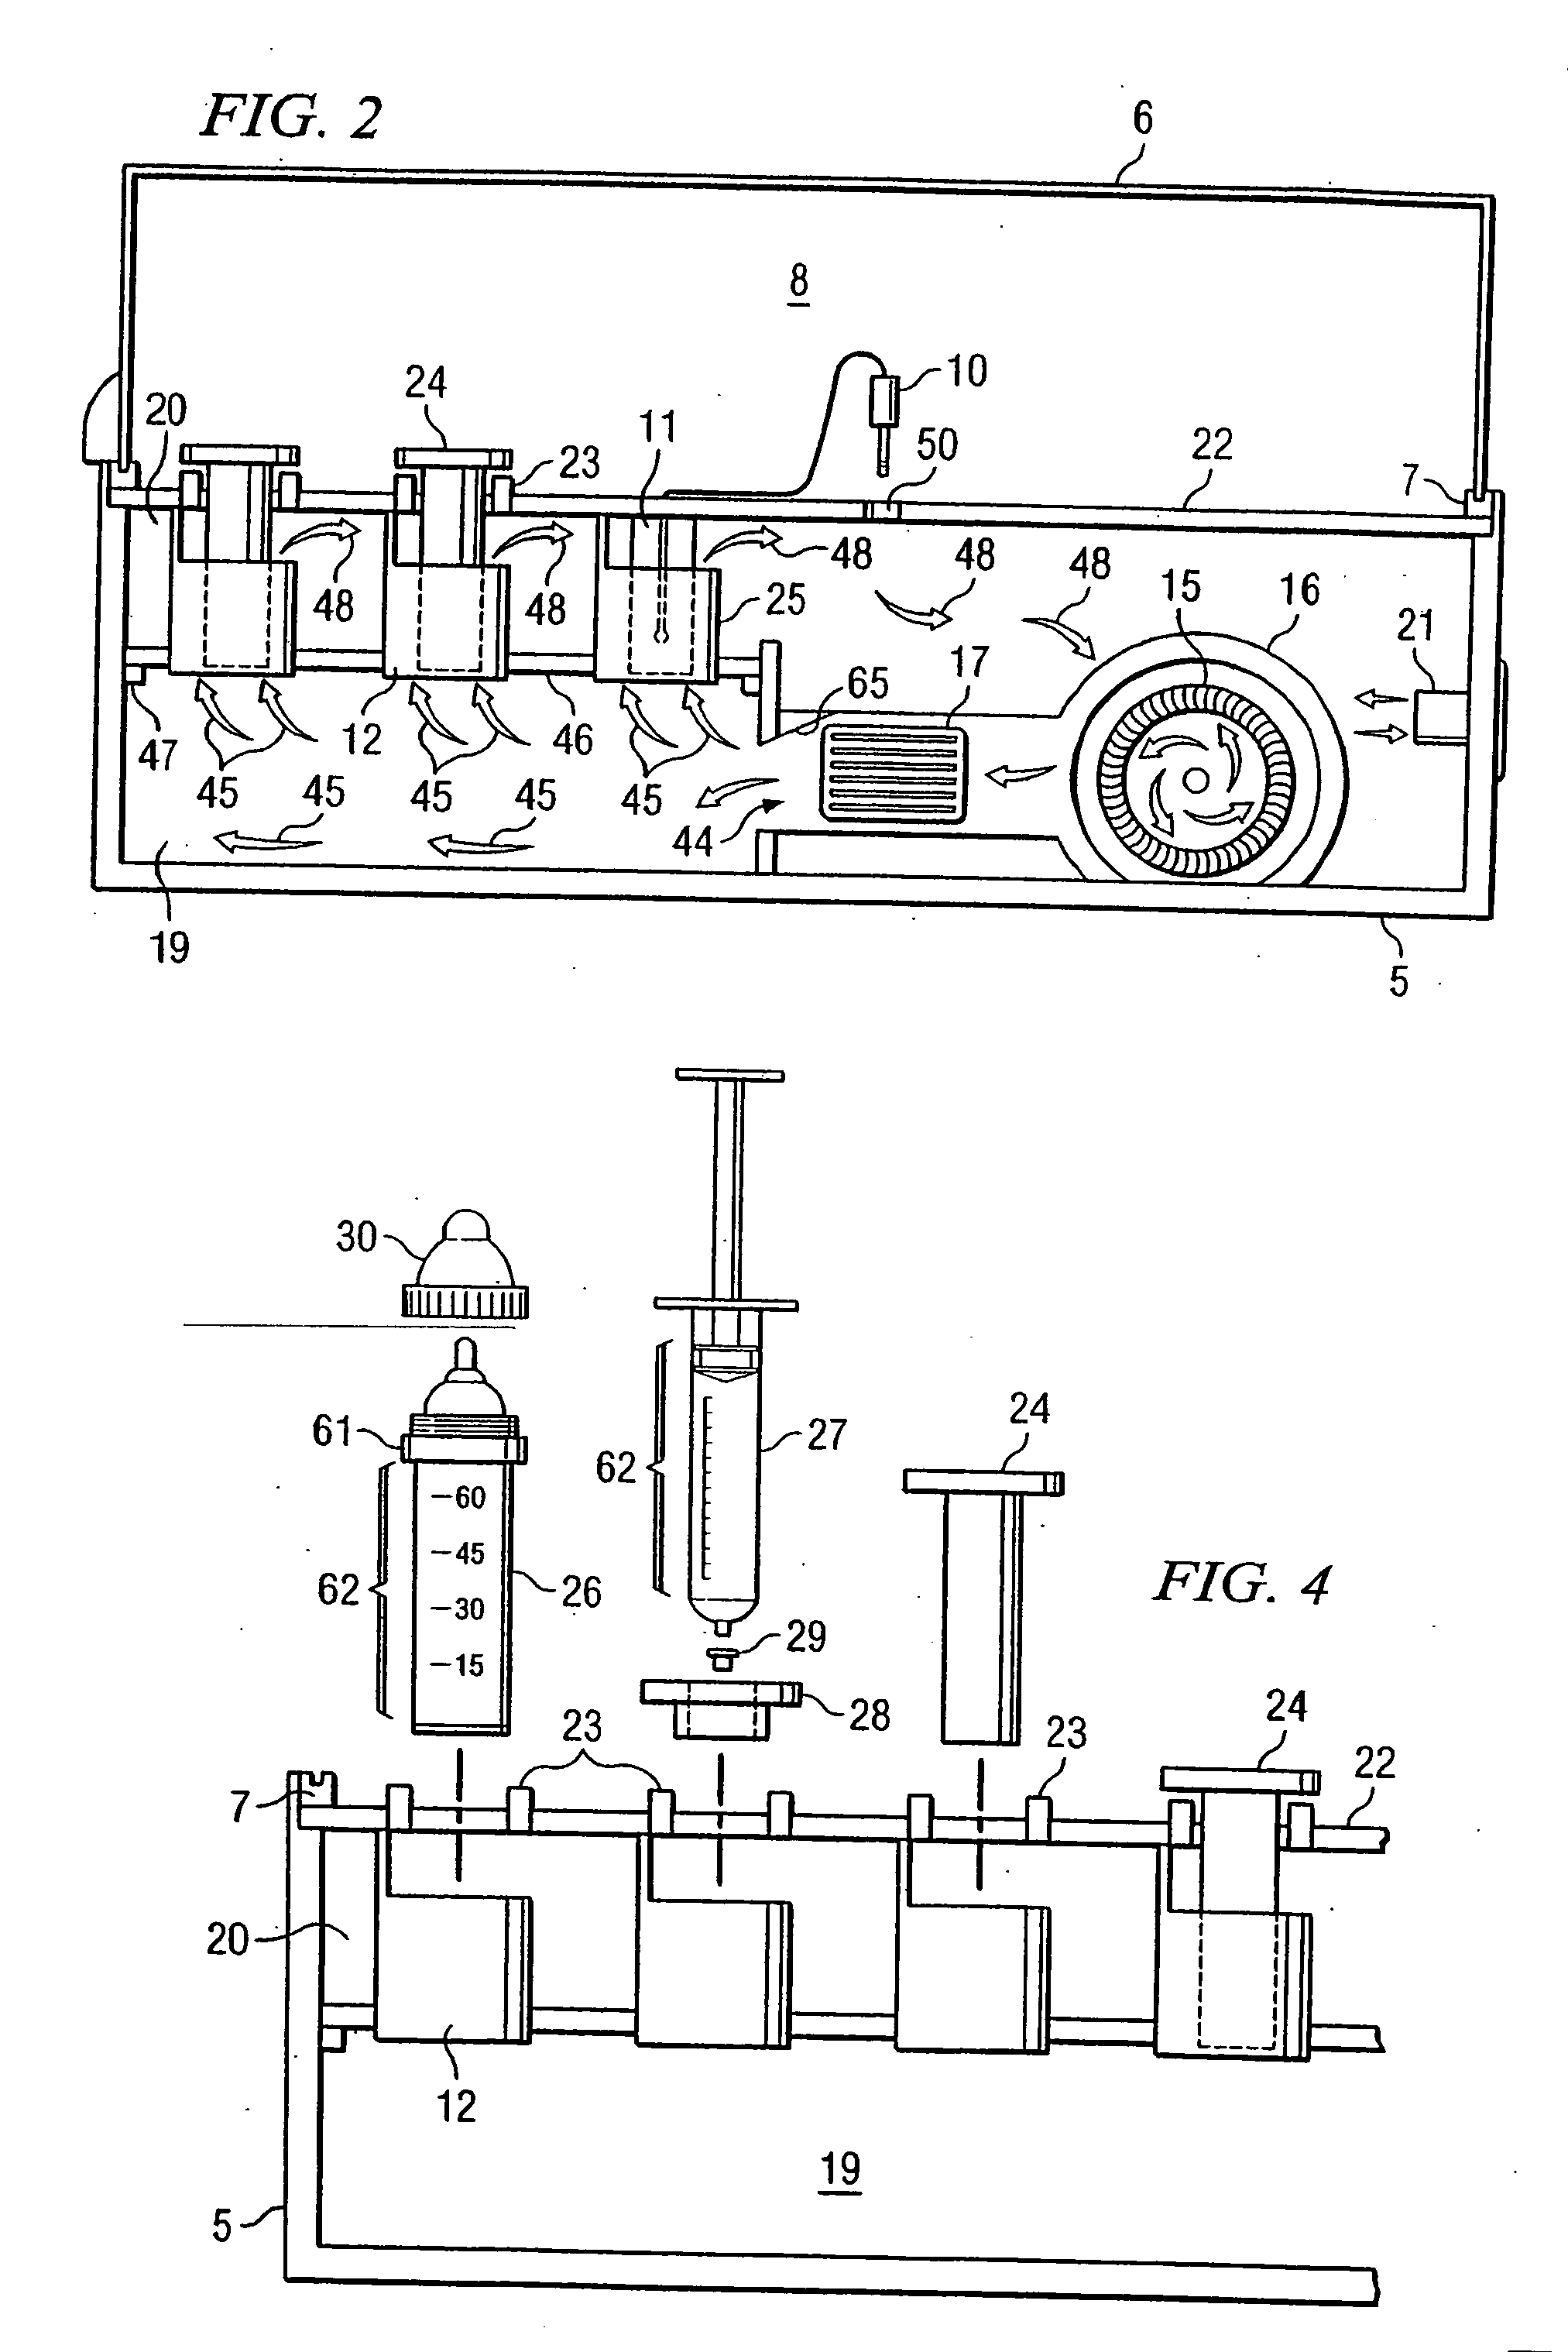 System and method for warming premature infant feedings